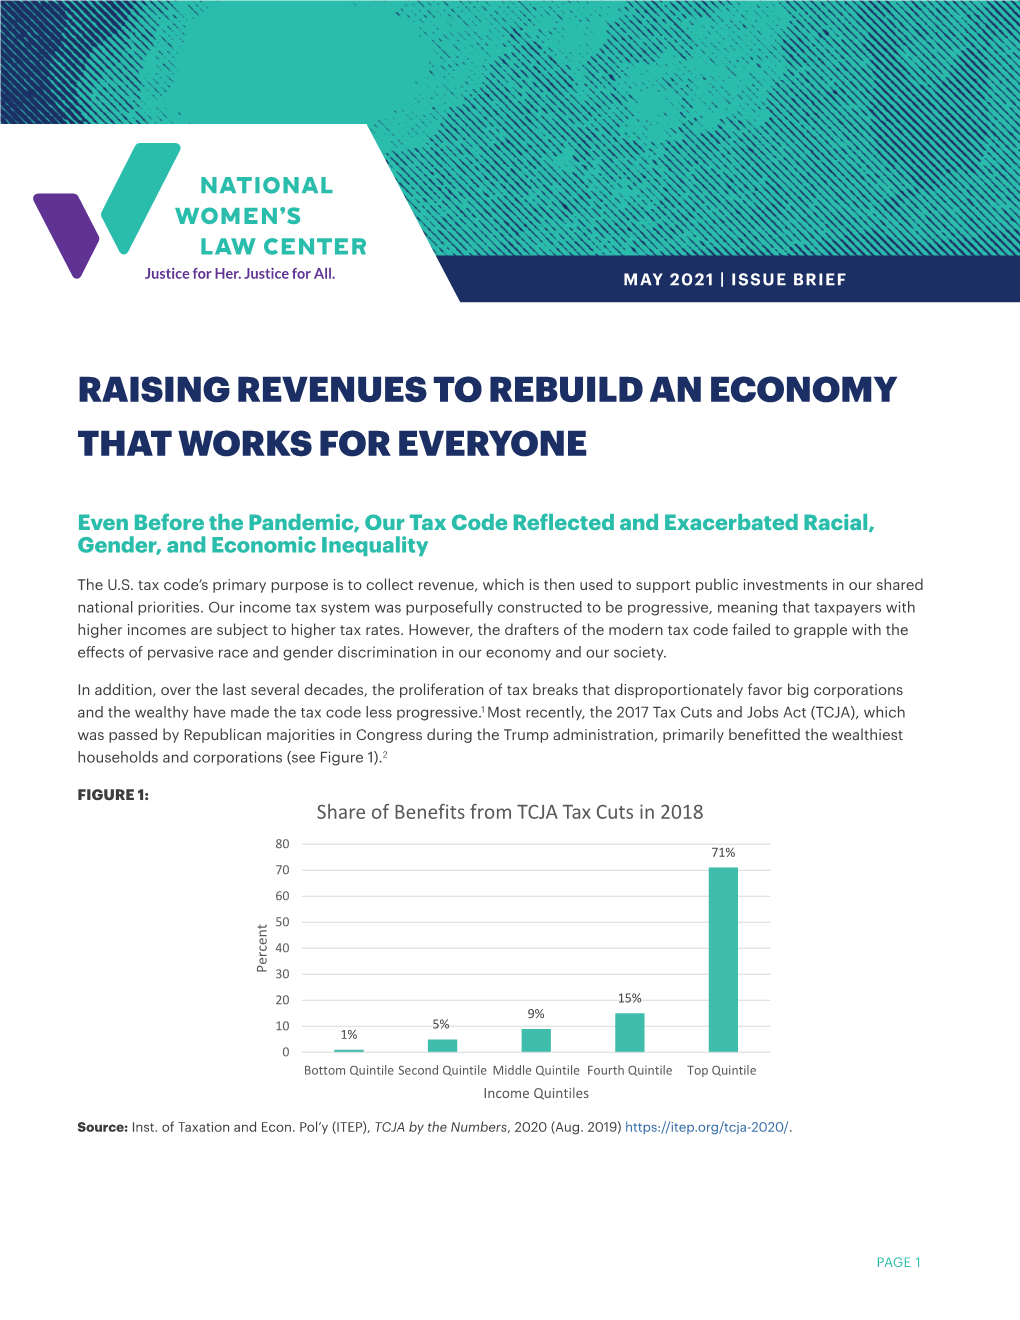 Raising Revenues to Rebuild an Economy That Works for Everyone